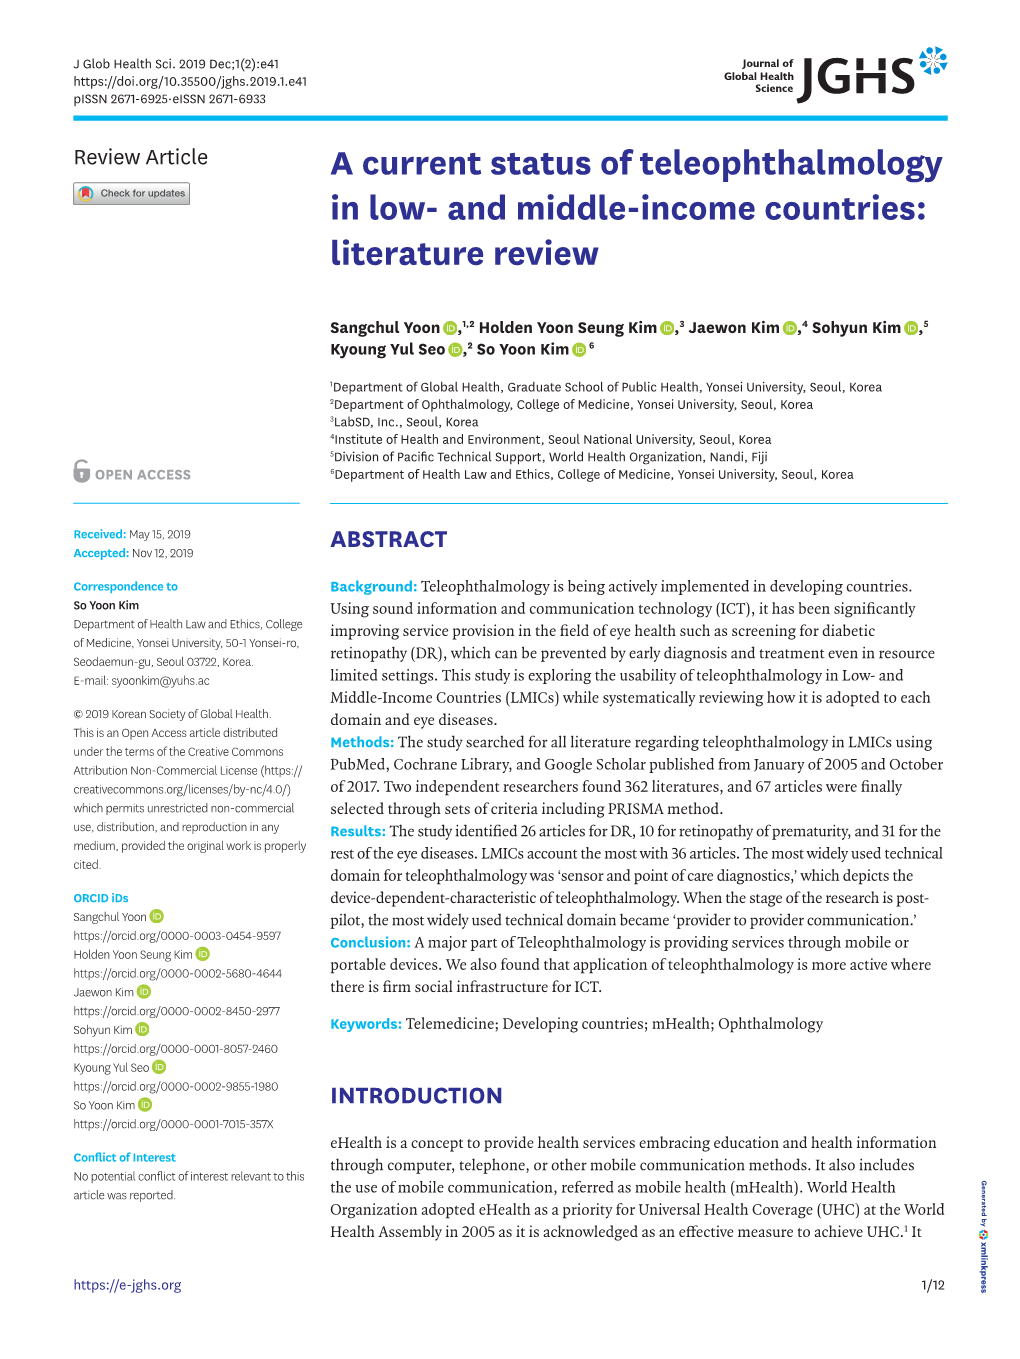 A Current Status of Teleophthalmology in Low- and Middle-Income Countries: Literature Review